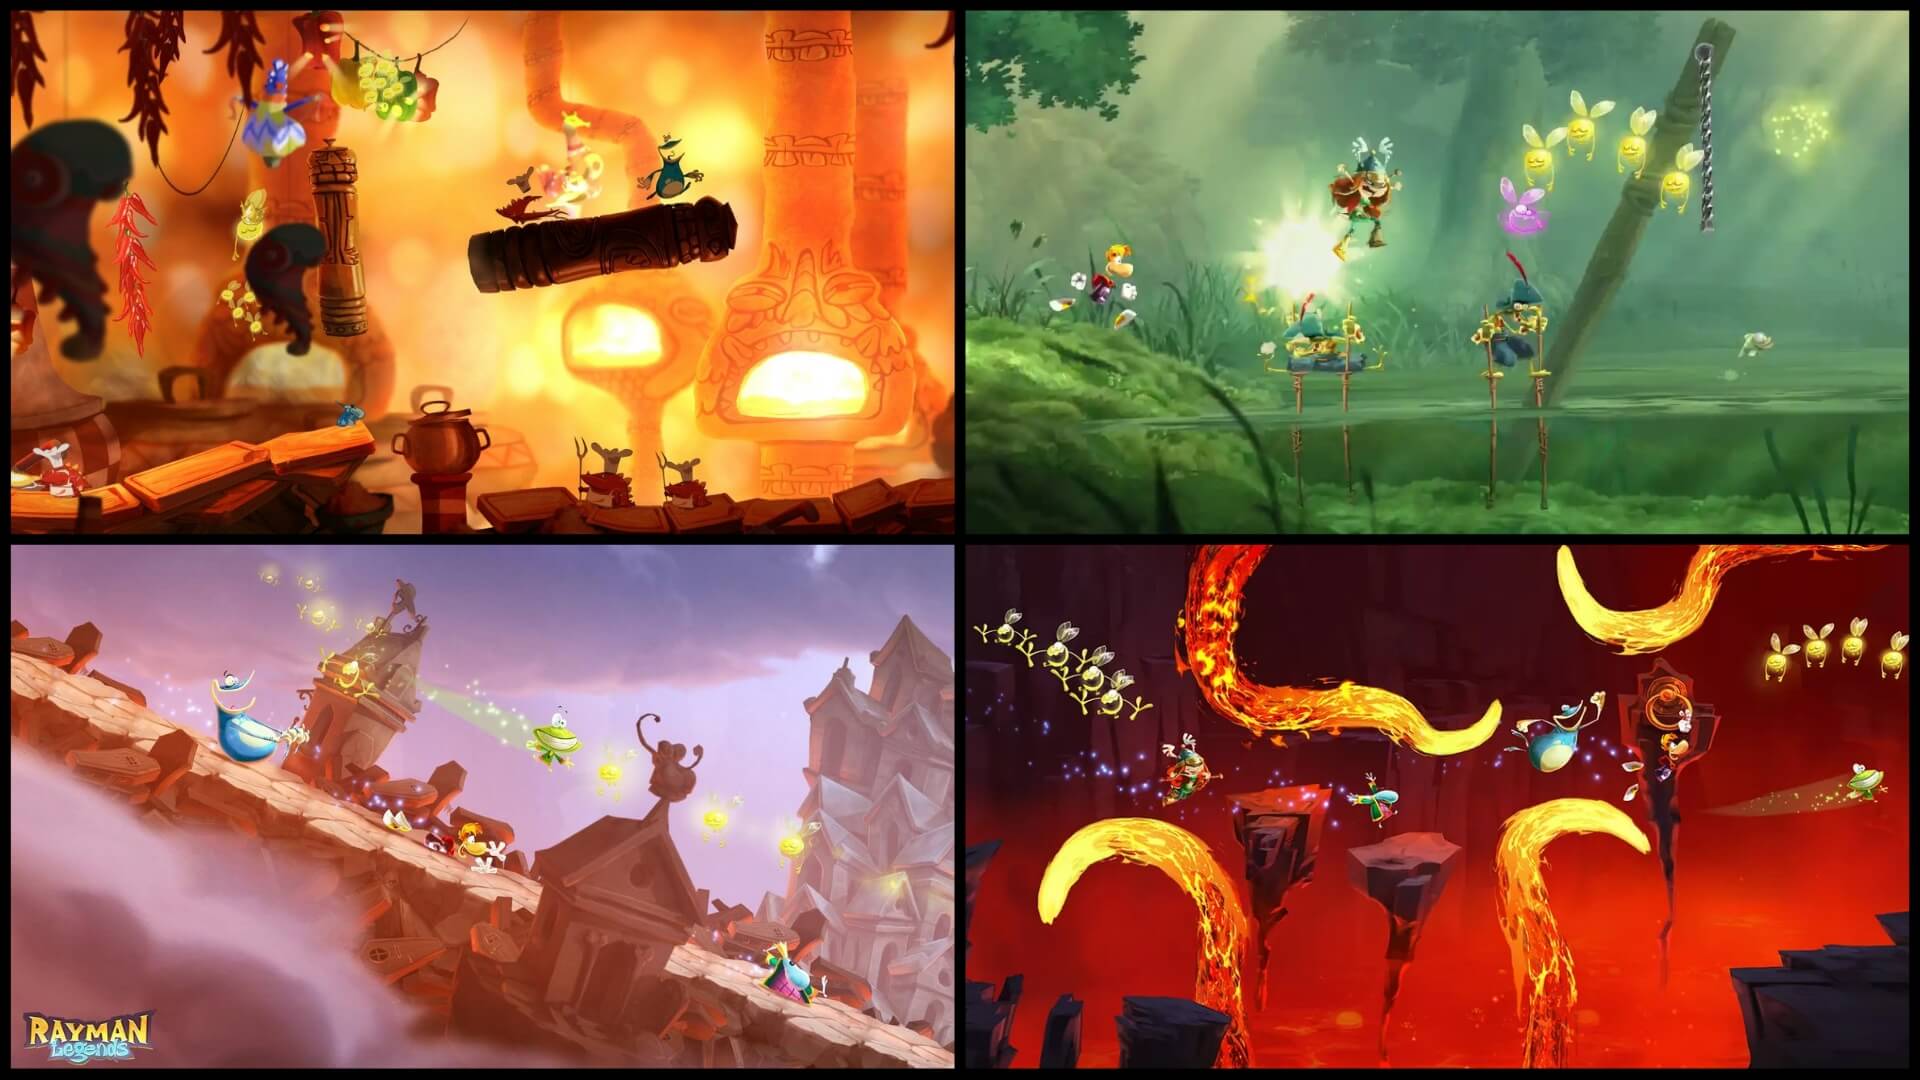 If you haven't played Rayman Legends yet, you're genuinely missing out on one of the best platformers